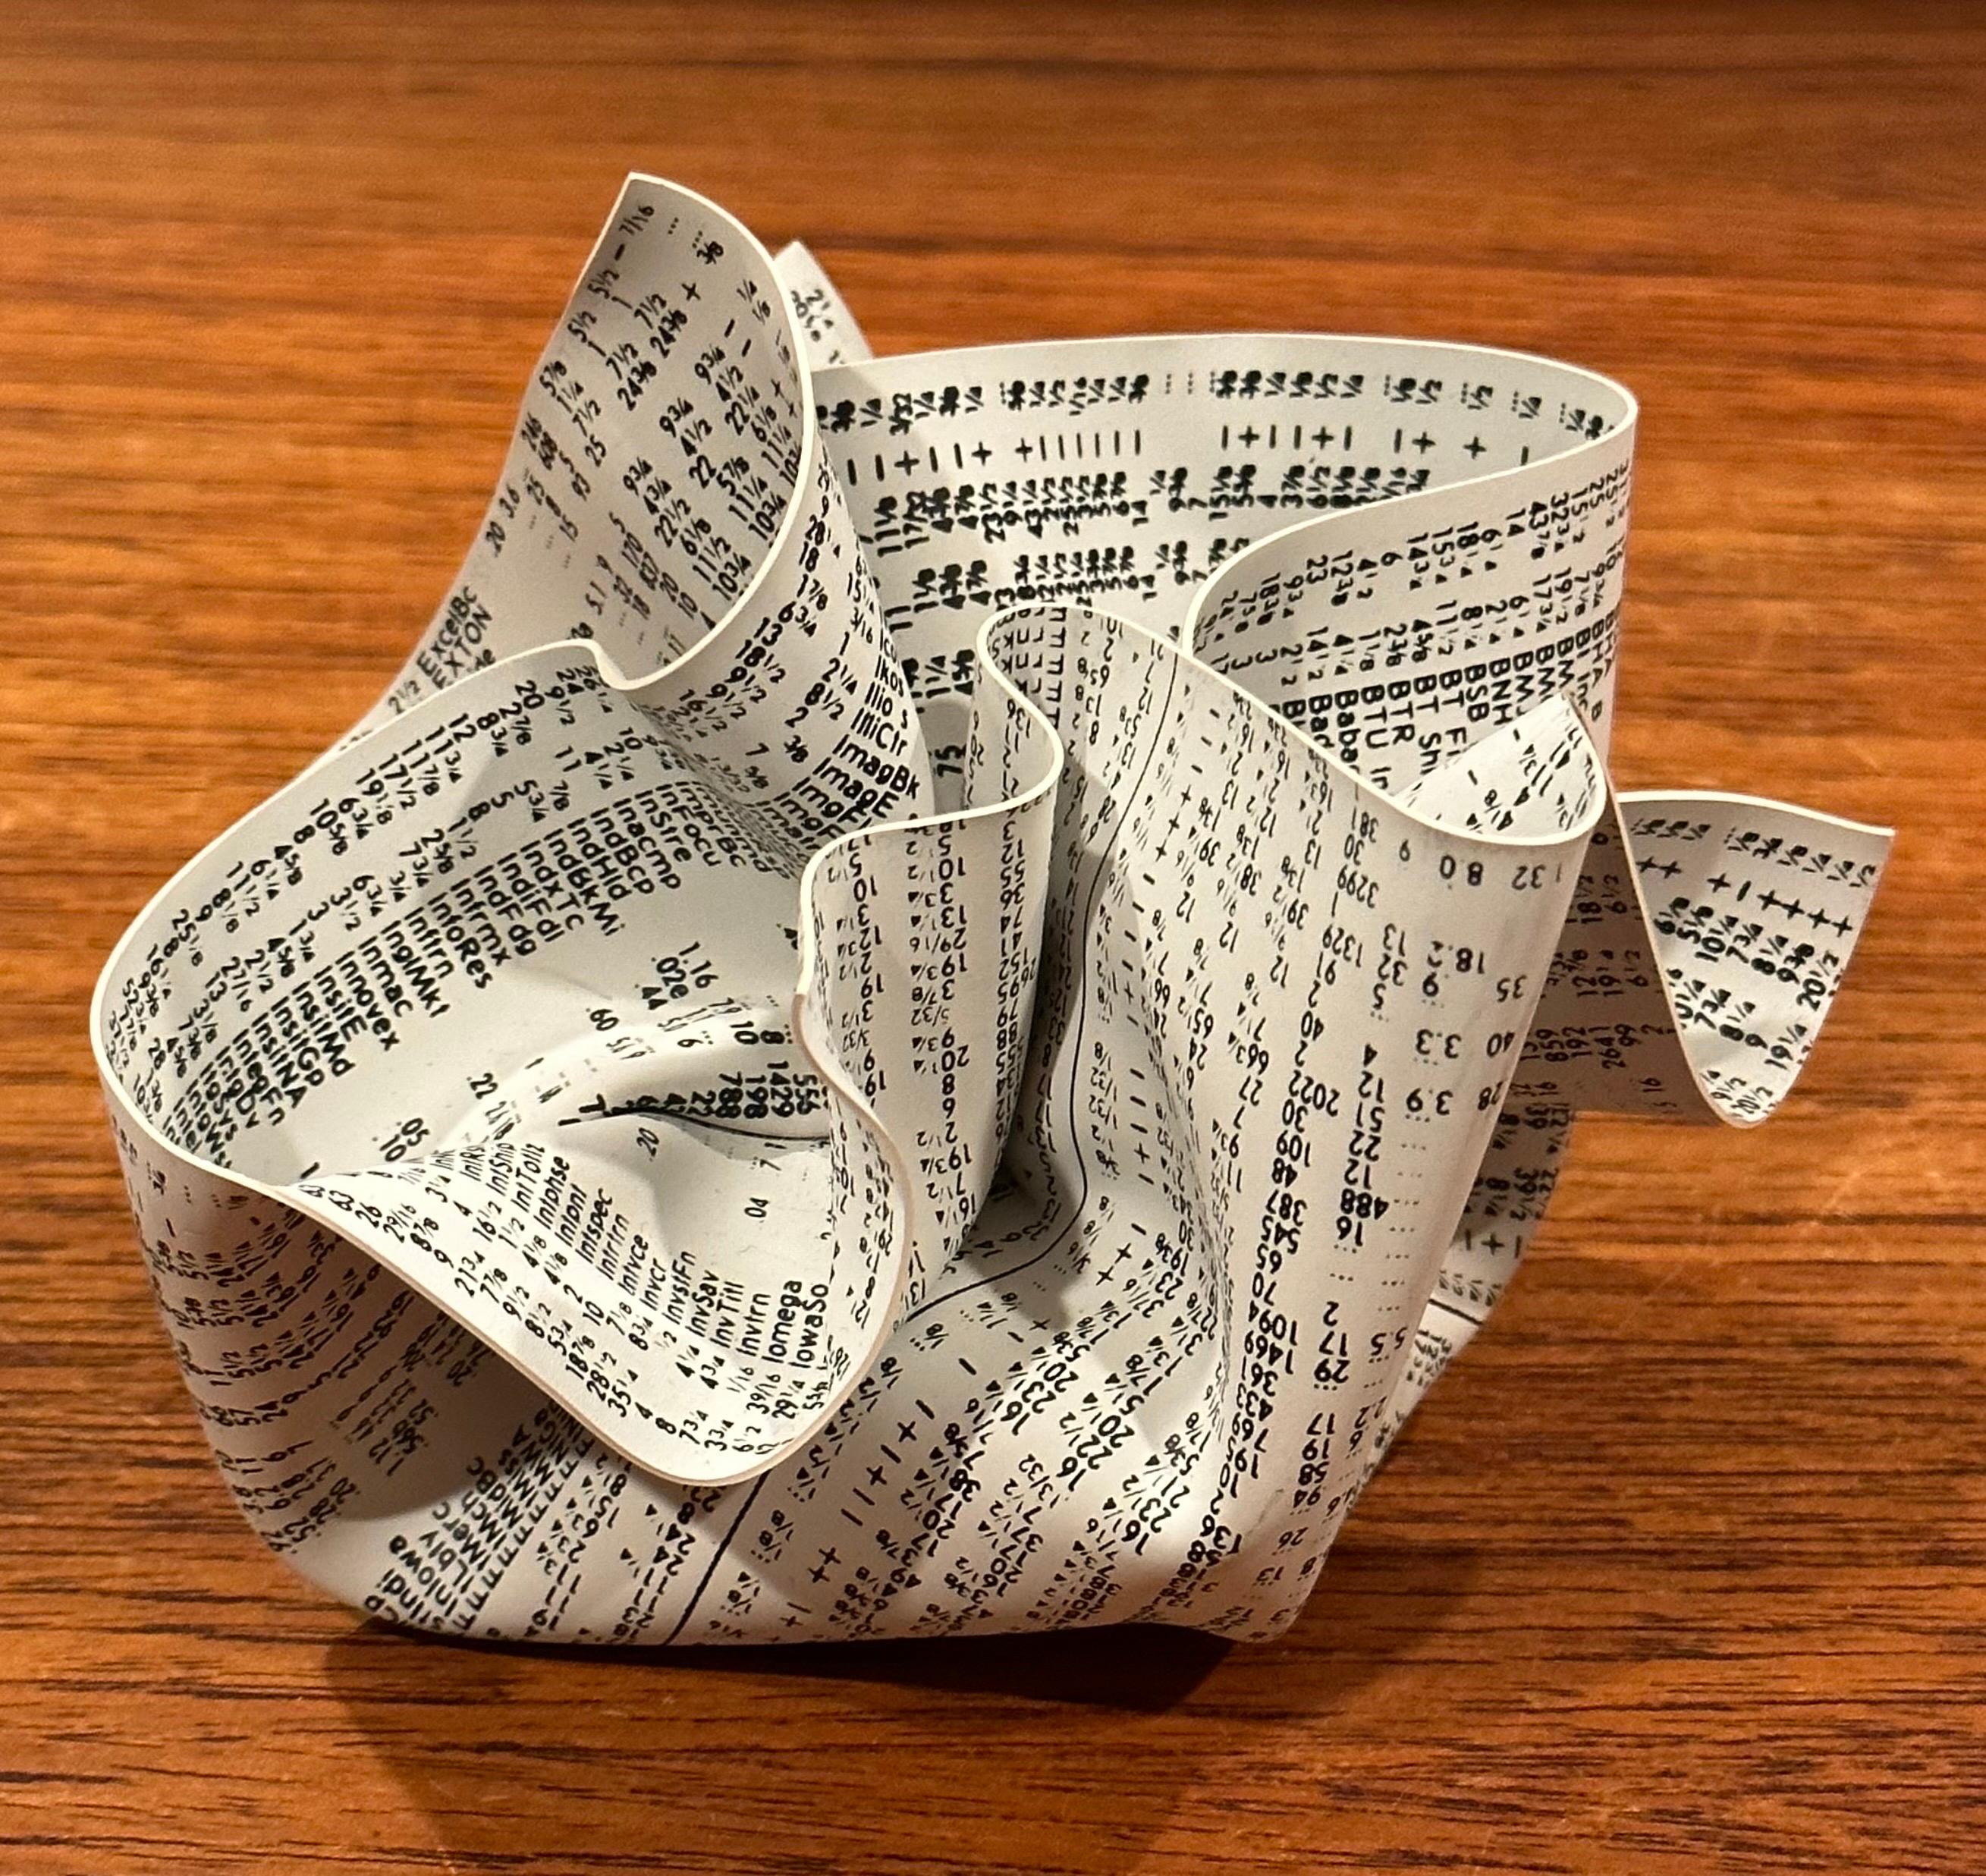 Crumpled WSJ / Newspaper Paperweight by Designer Tibor Kalman for M & Co. / MOMA For Sale 1